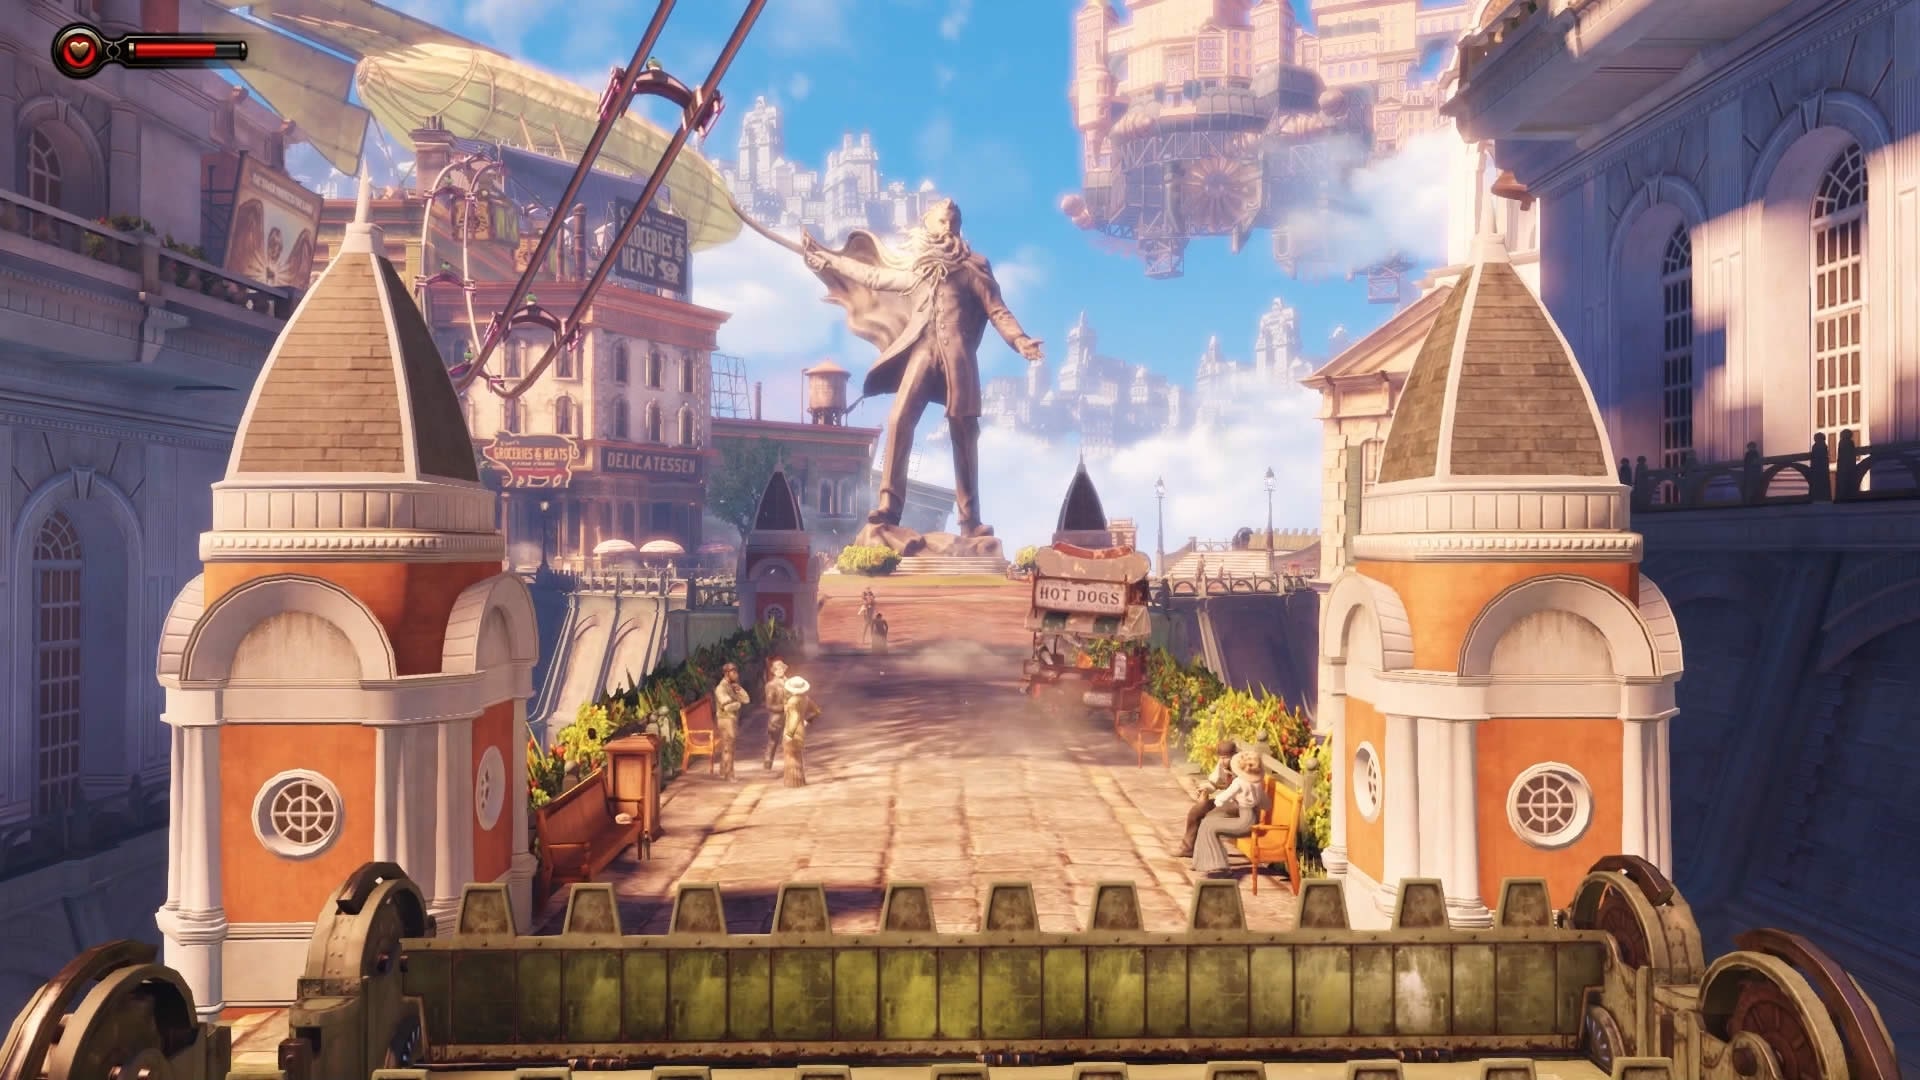 Bioshock Infinite: The Complete Edition on PS4 — price history,  screenshots, discounts • USA